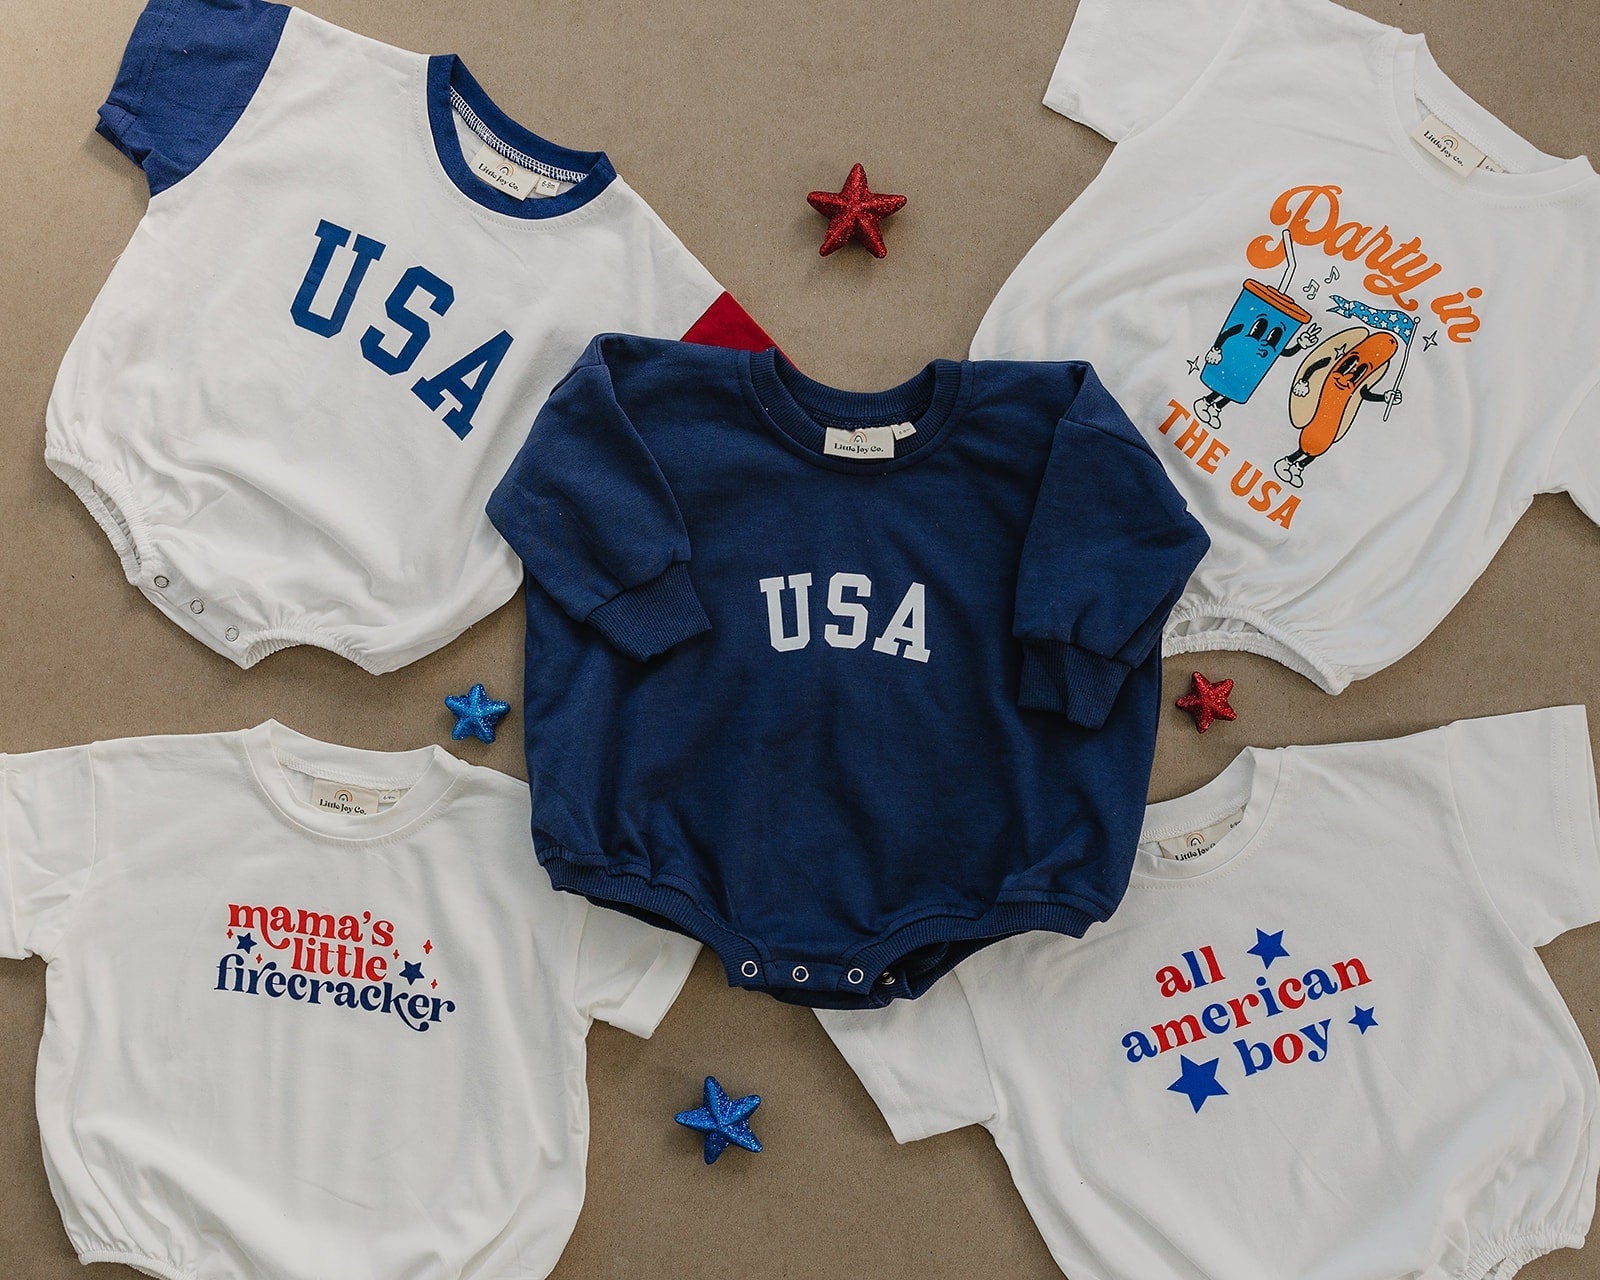 All American Boy Graphic Oversized T-Shirt Romper - Baby Boy Bubble Romper - 4th of July Outfit - Red, White & Blue Patriotic Shirt - USA